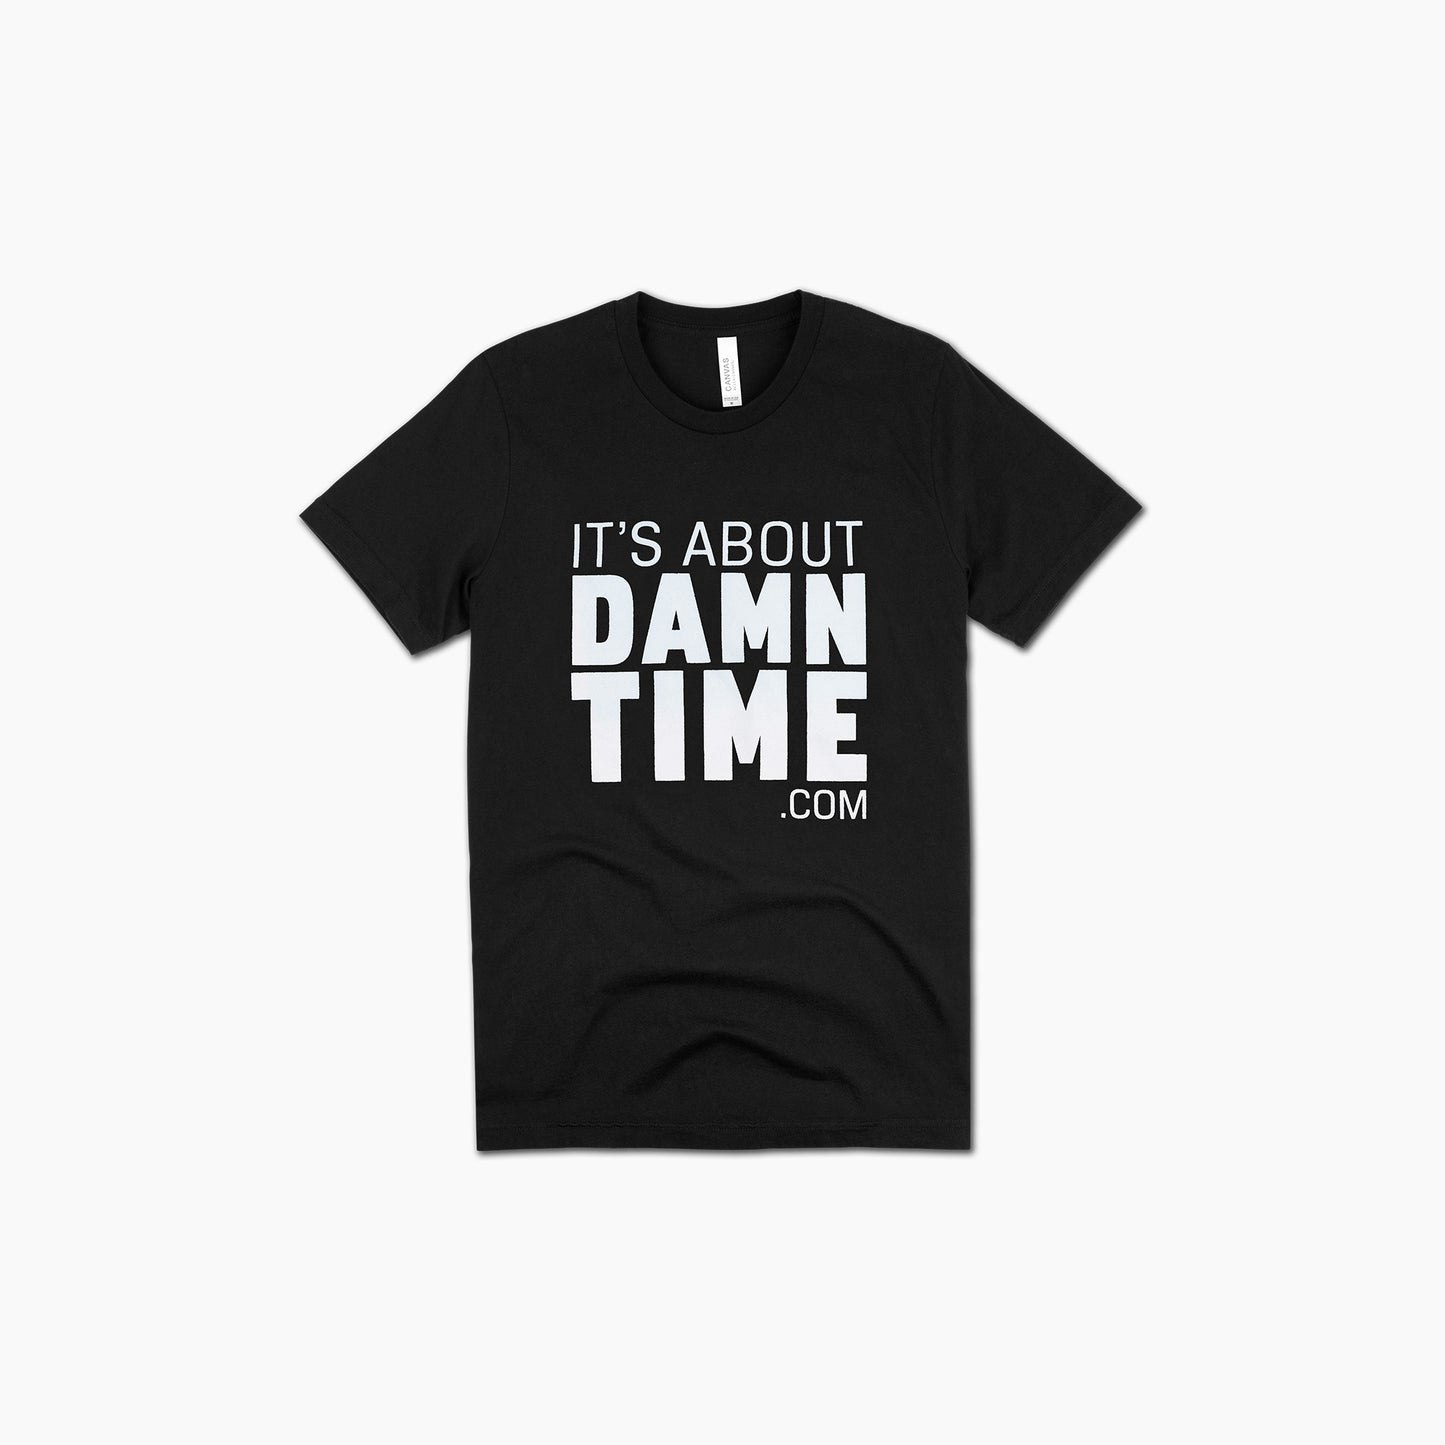 'It's About Damn Time' Tee